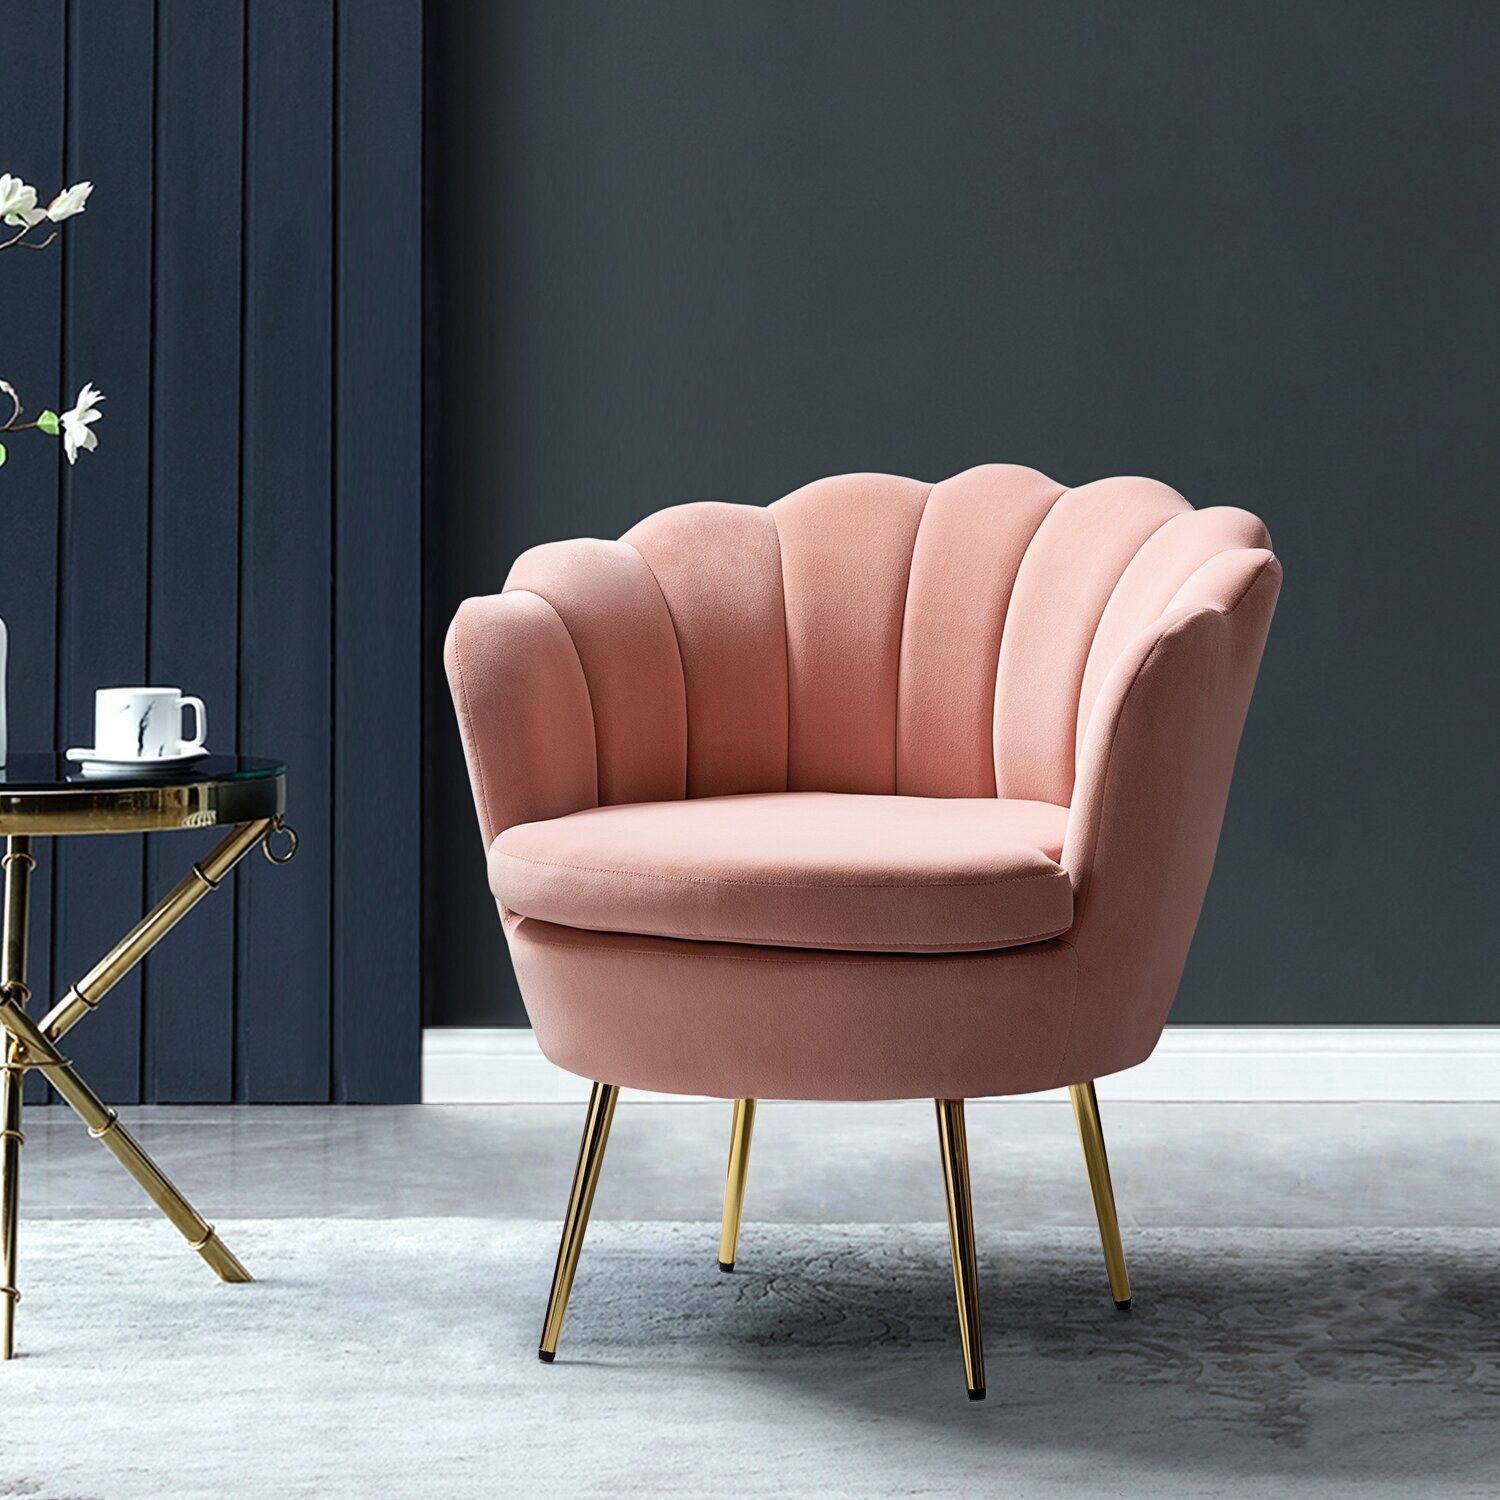 A light pink velvet accent chair that has a shell-like cushion.